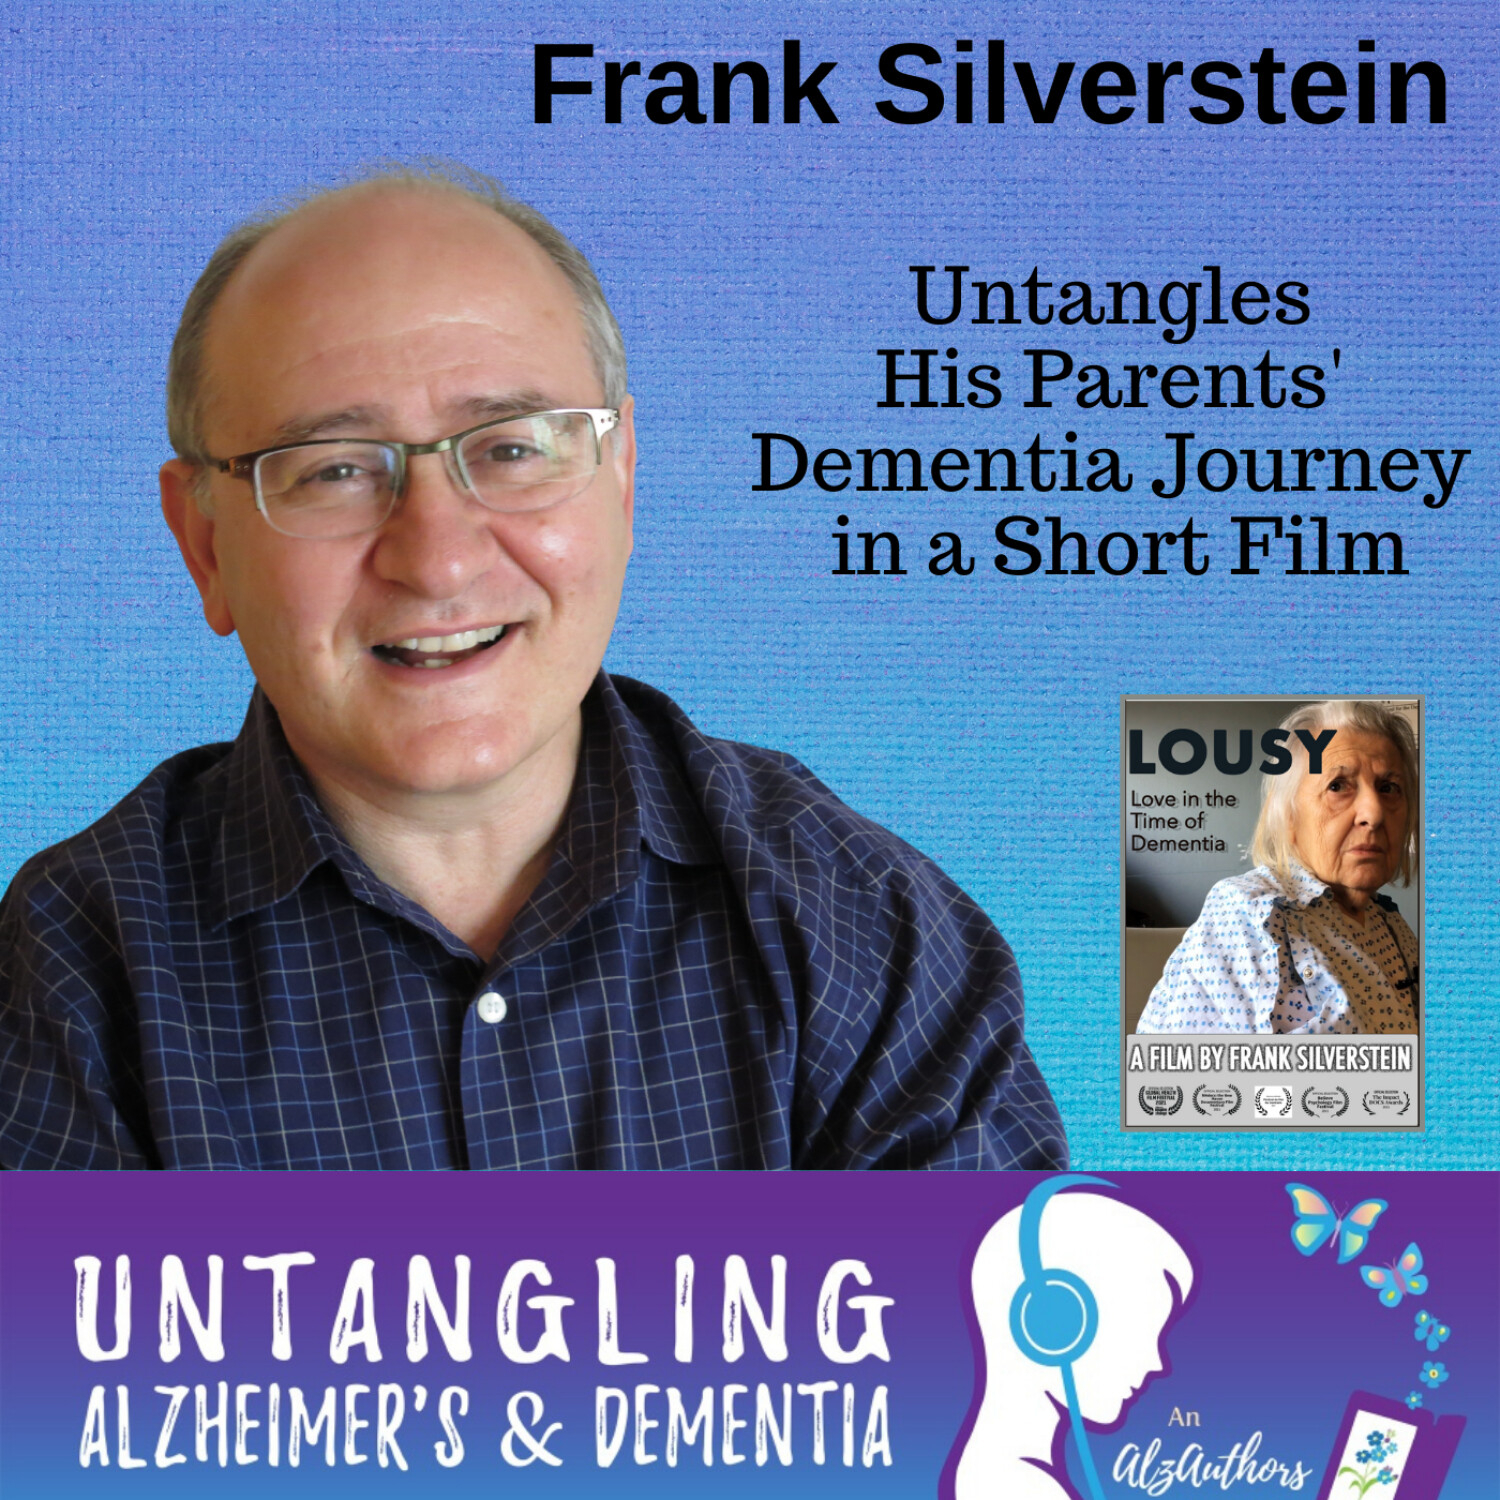 Frank Silverstein Untangles His Parents' Dementia Story in a Short FIlm